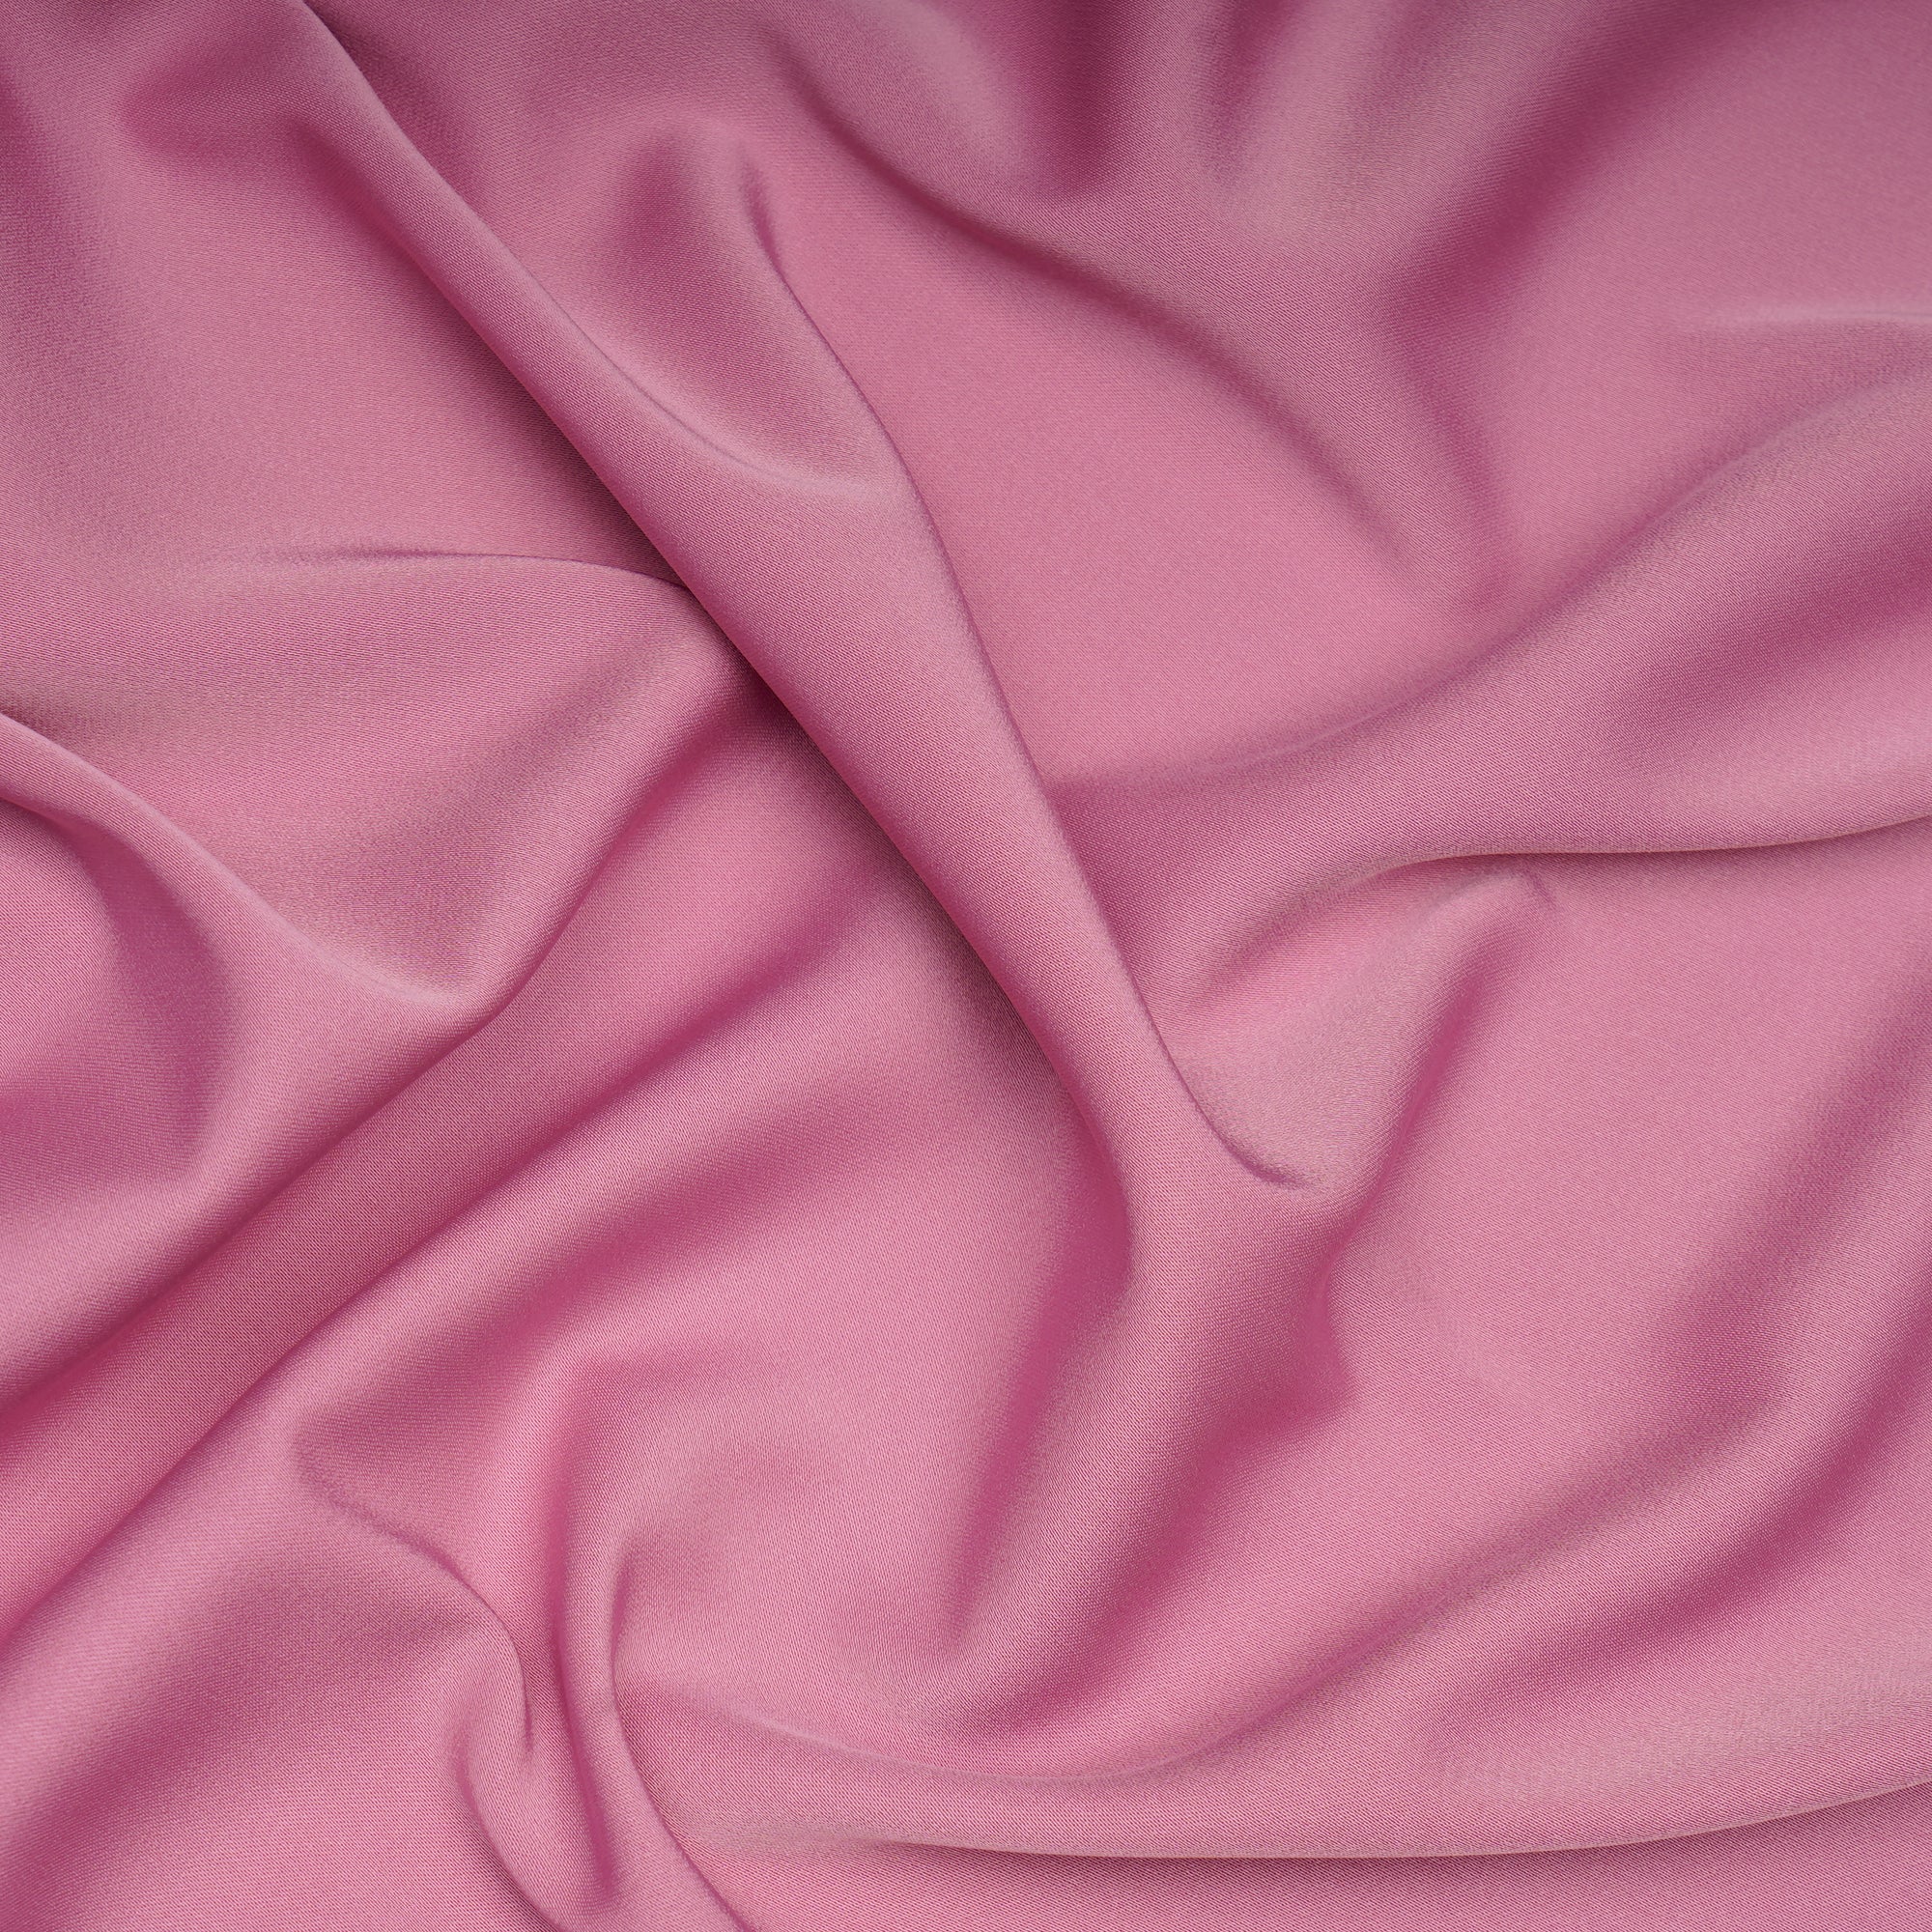 Blush Pink Solid Dyed Imported Prada Crepe Fabric (60" Width)